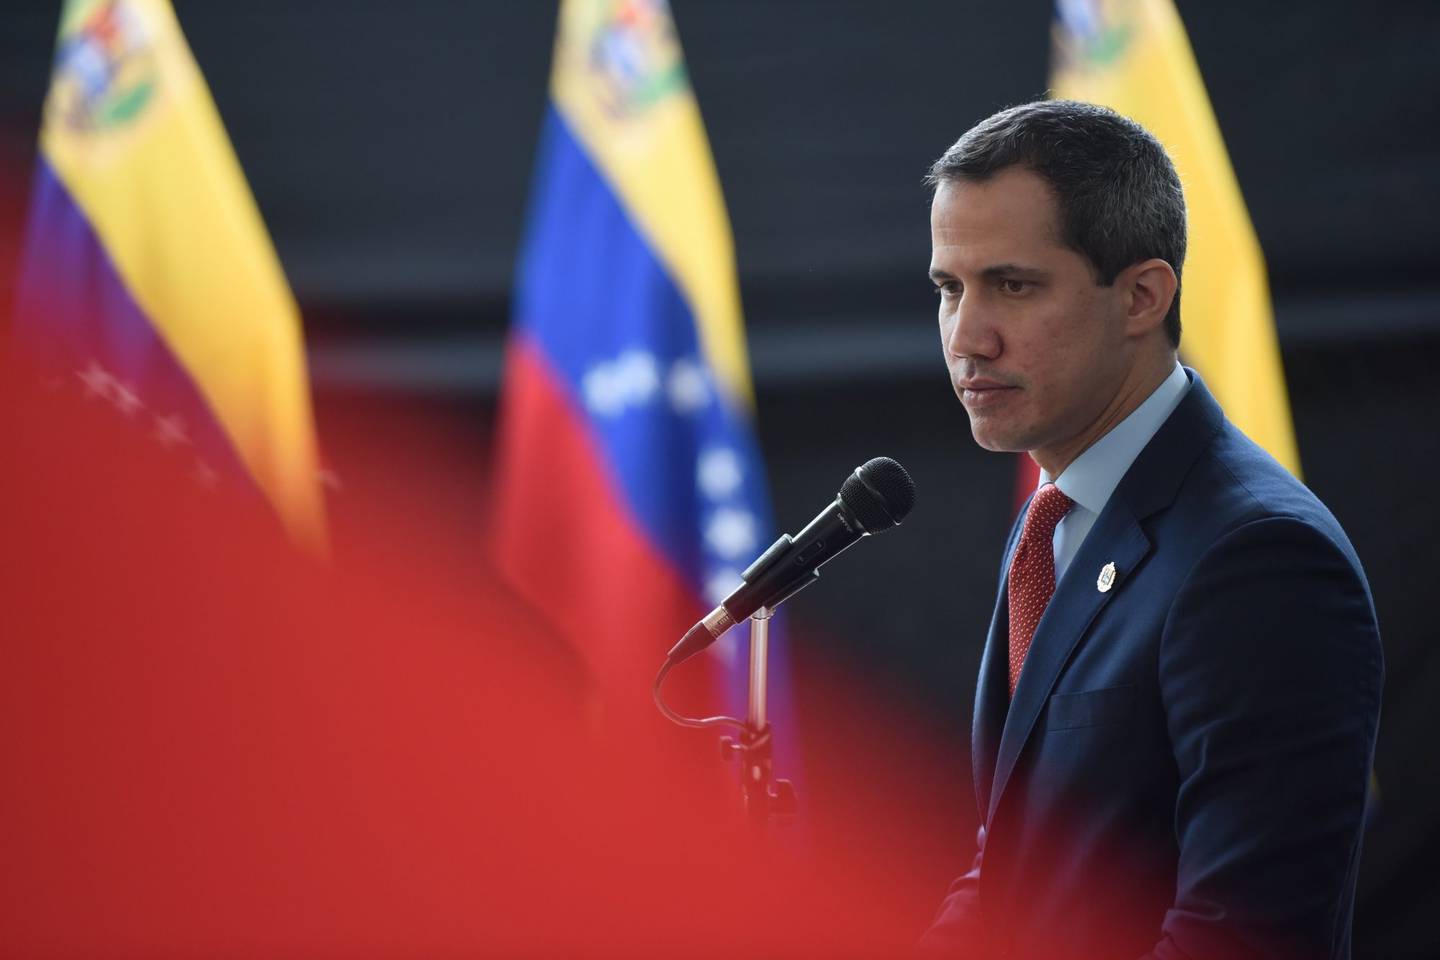 Juan Guaido, former president of the National Assembly